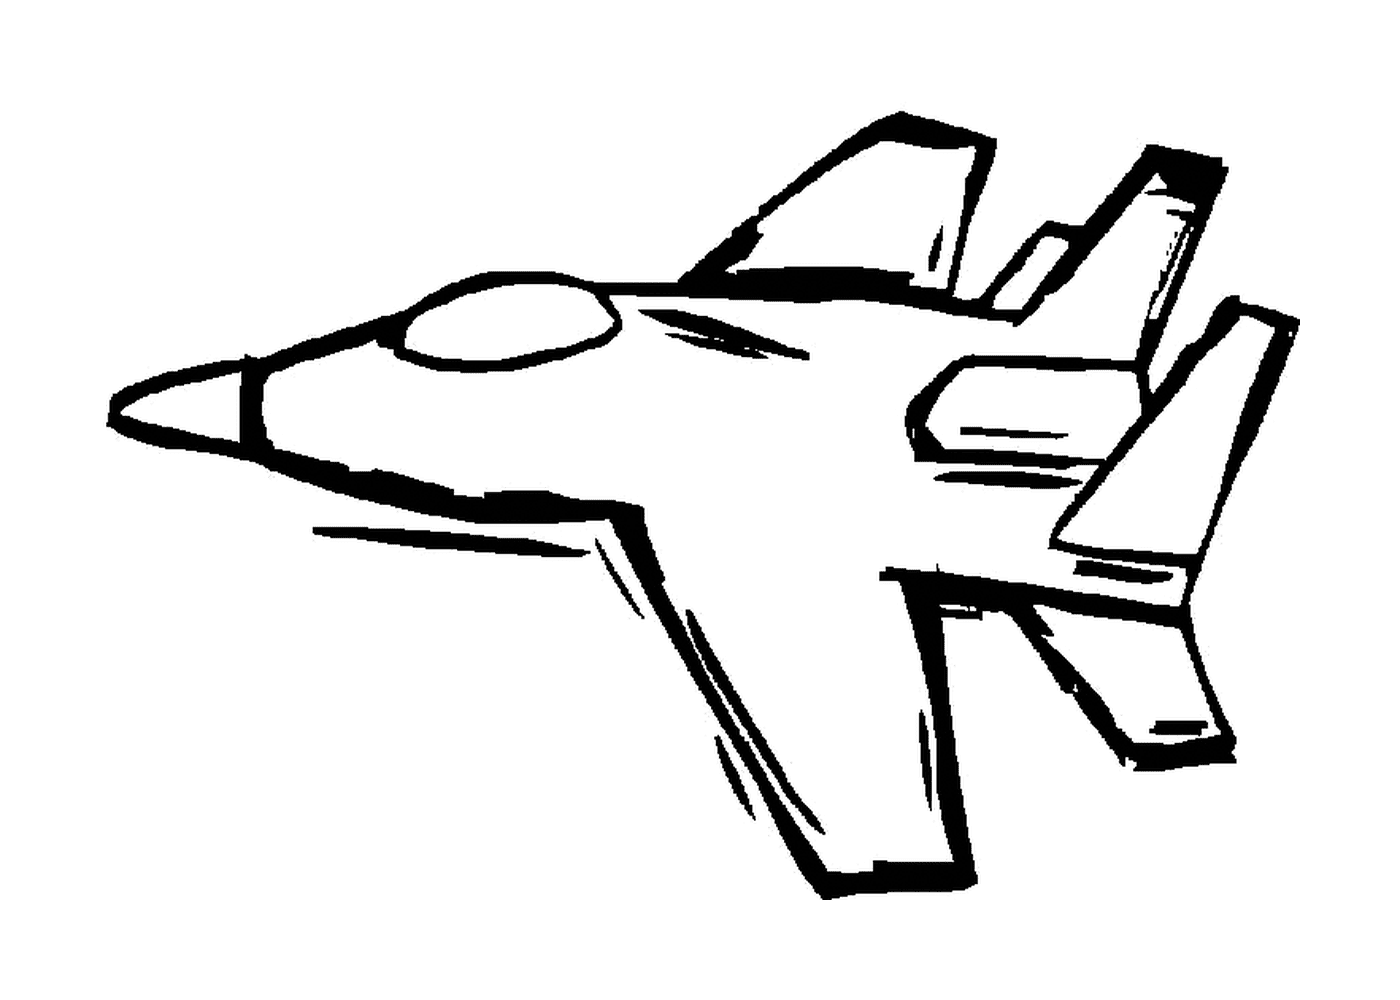  A fighter plane 